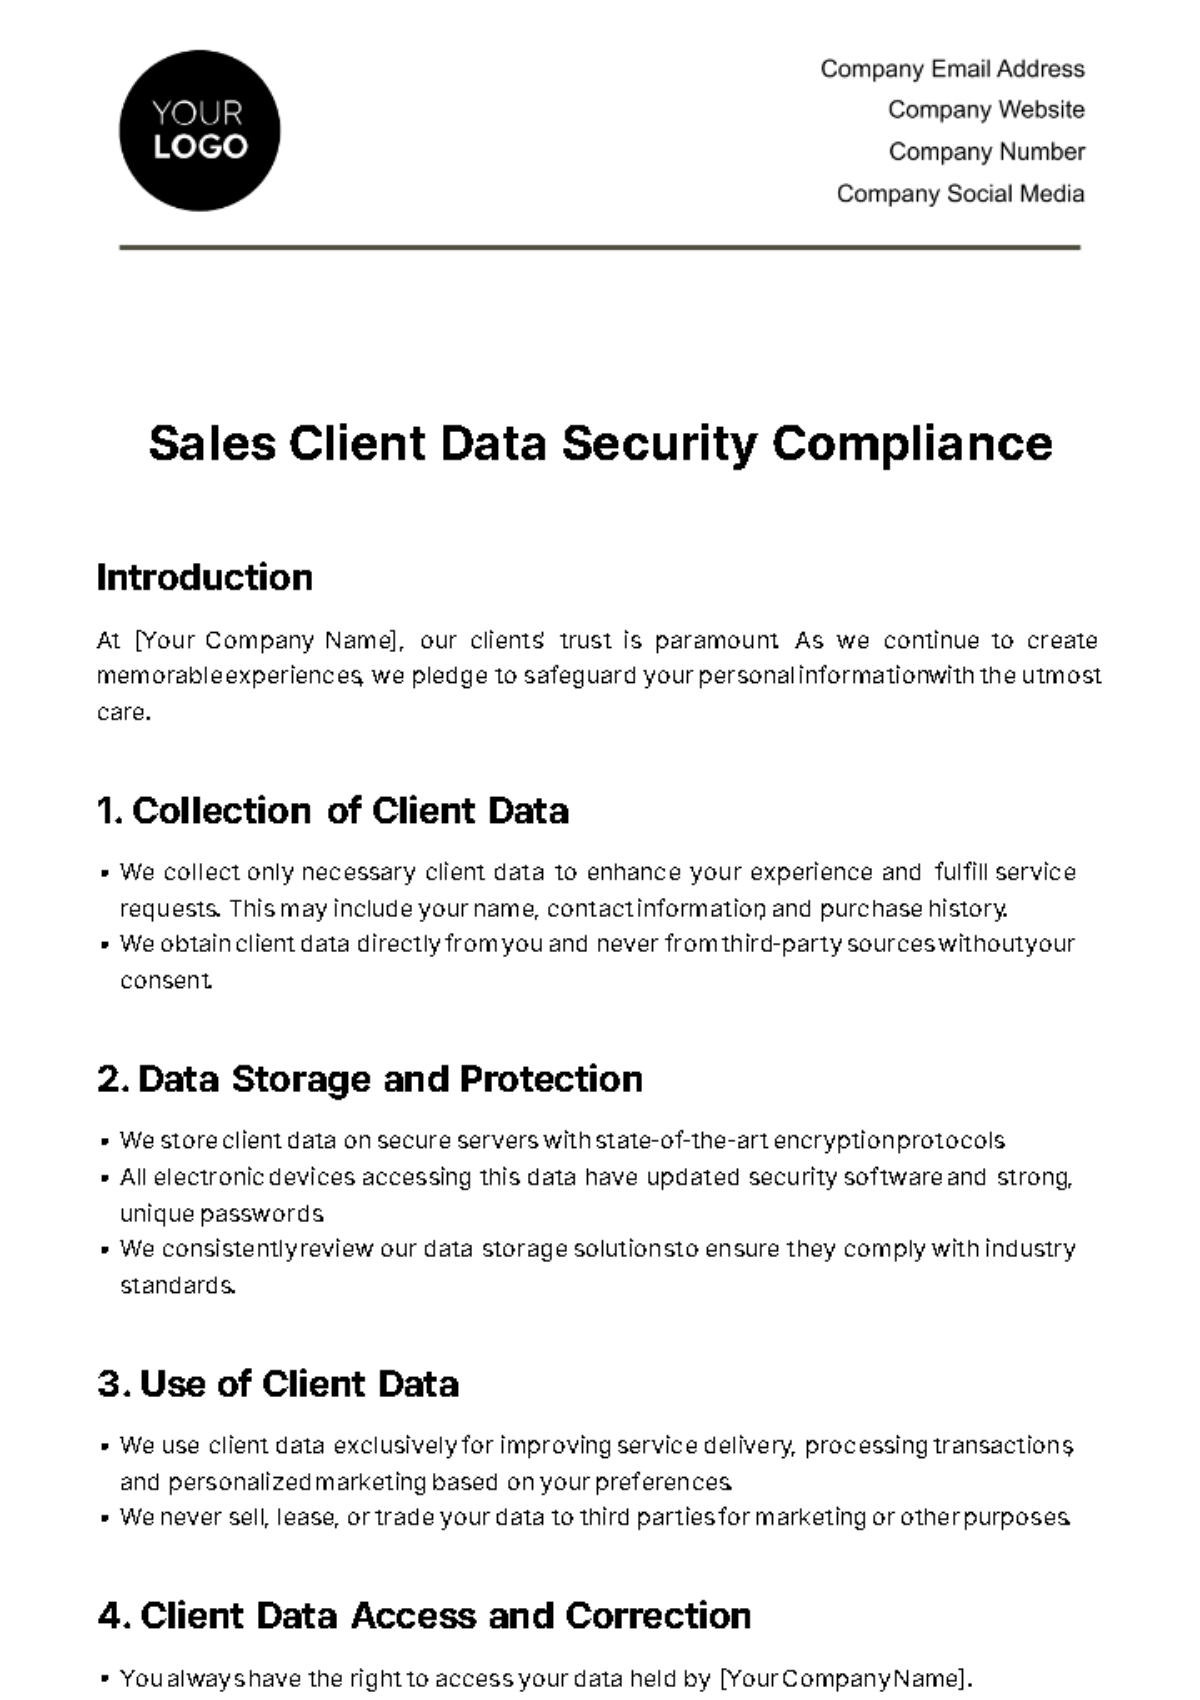 Sales Client Data Security Compliance Template